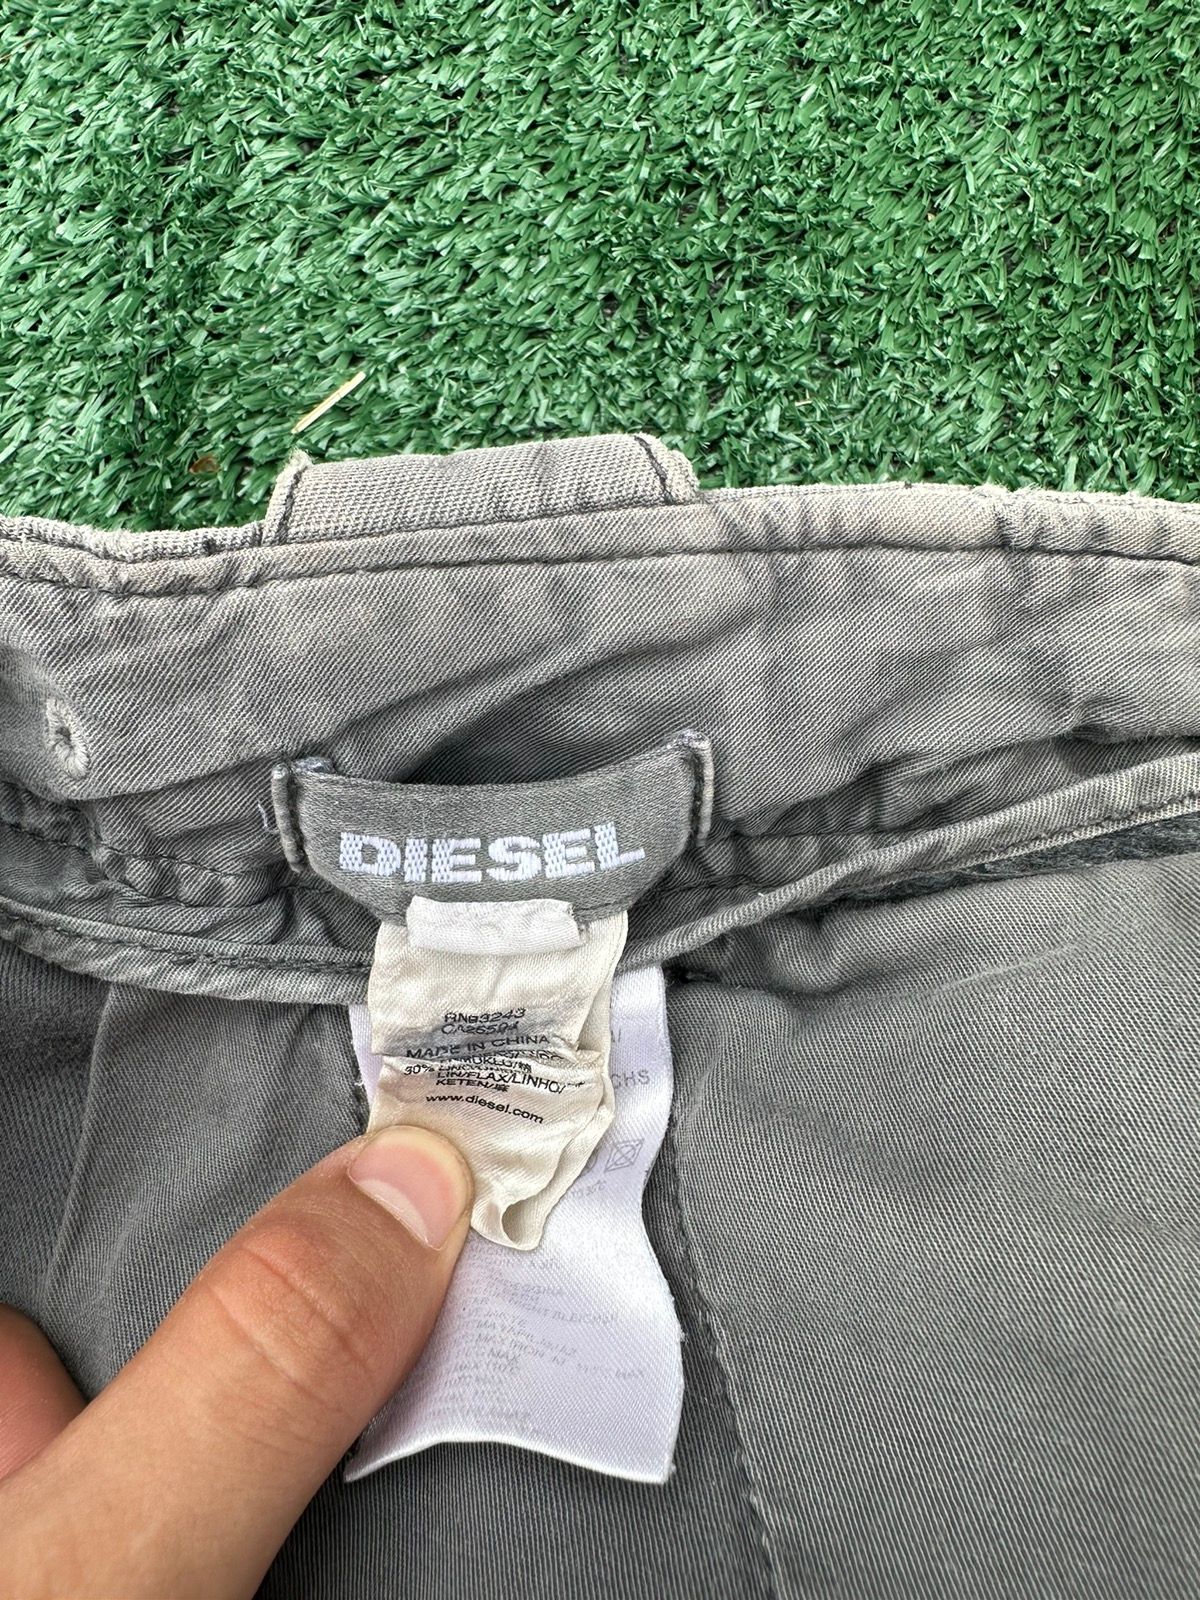 Diesel Diesel Distressed Faded Cargo shorts 34 Size US 34 / EU 50 - 3 Preview